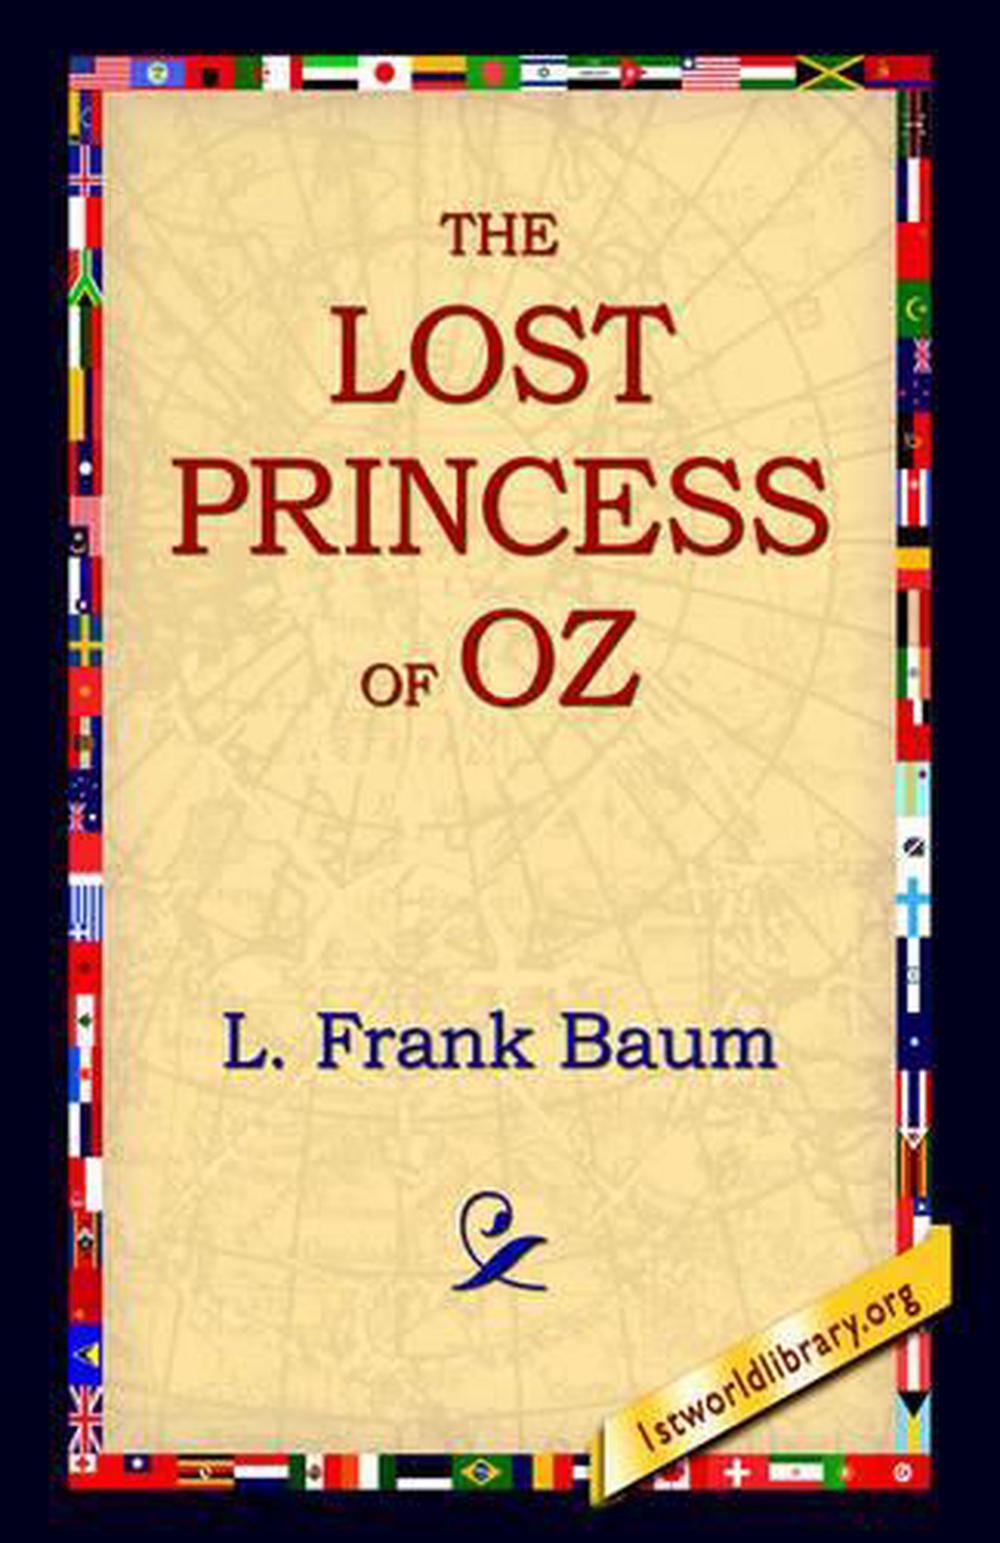 The Lost Princess of Oz by L. Frank Baum